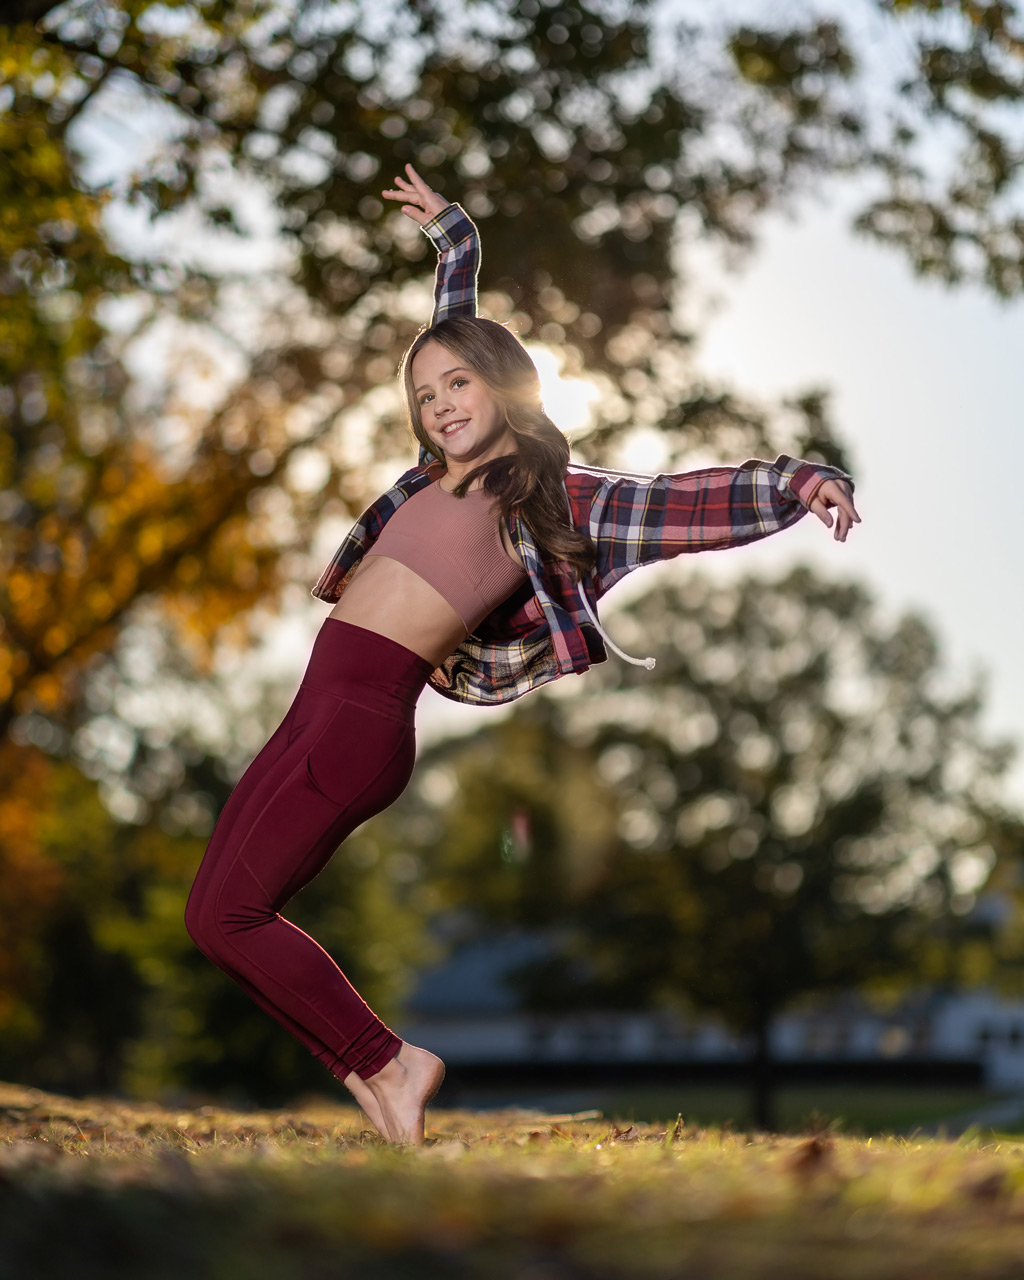 Exulting Images’ outdoor dance photography of young female dancer in maroon leggings and plaid shirt posing on tip toe in front of blurry trees